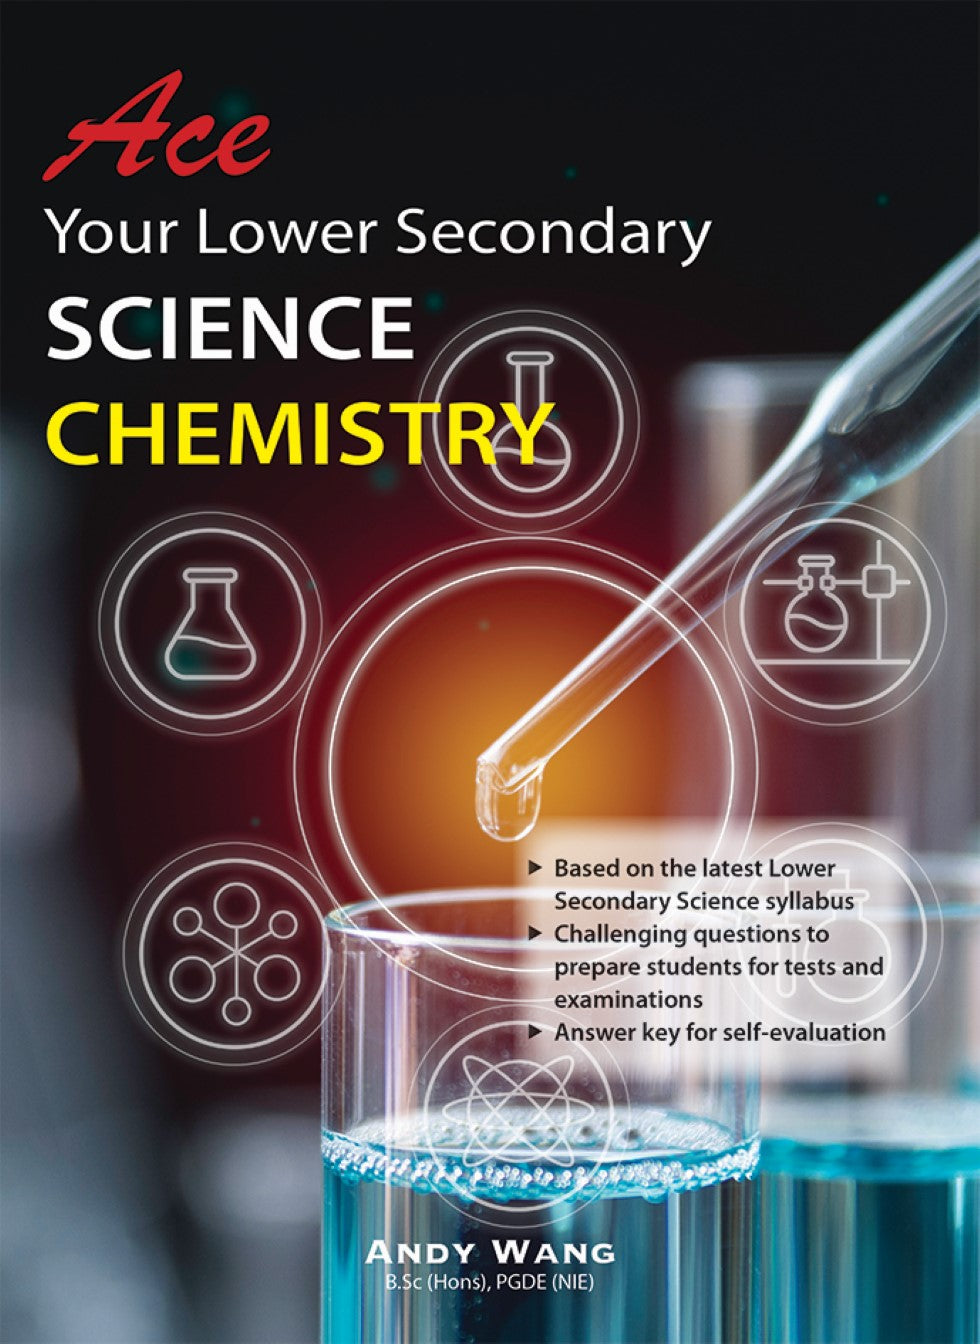 Ace Your Lower Secondary Science Chemistry